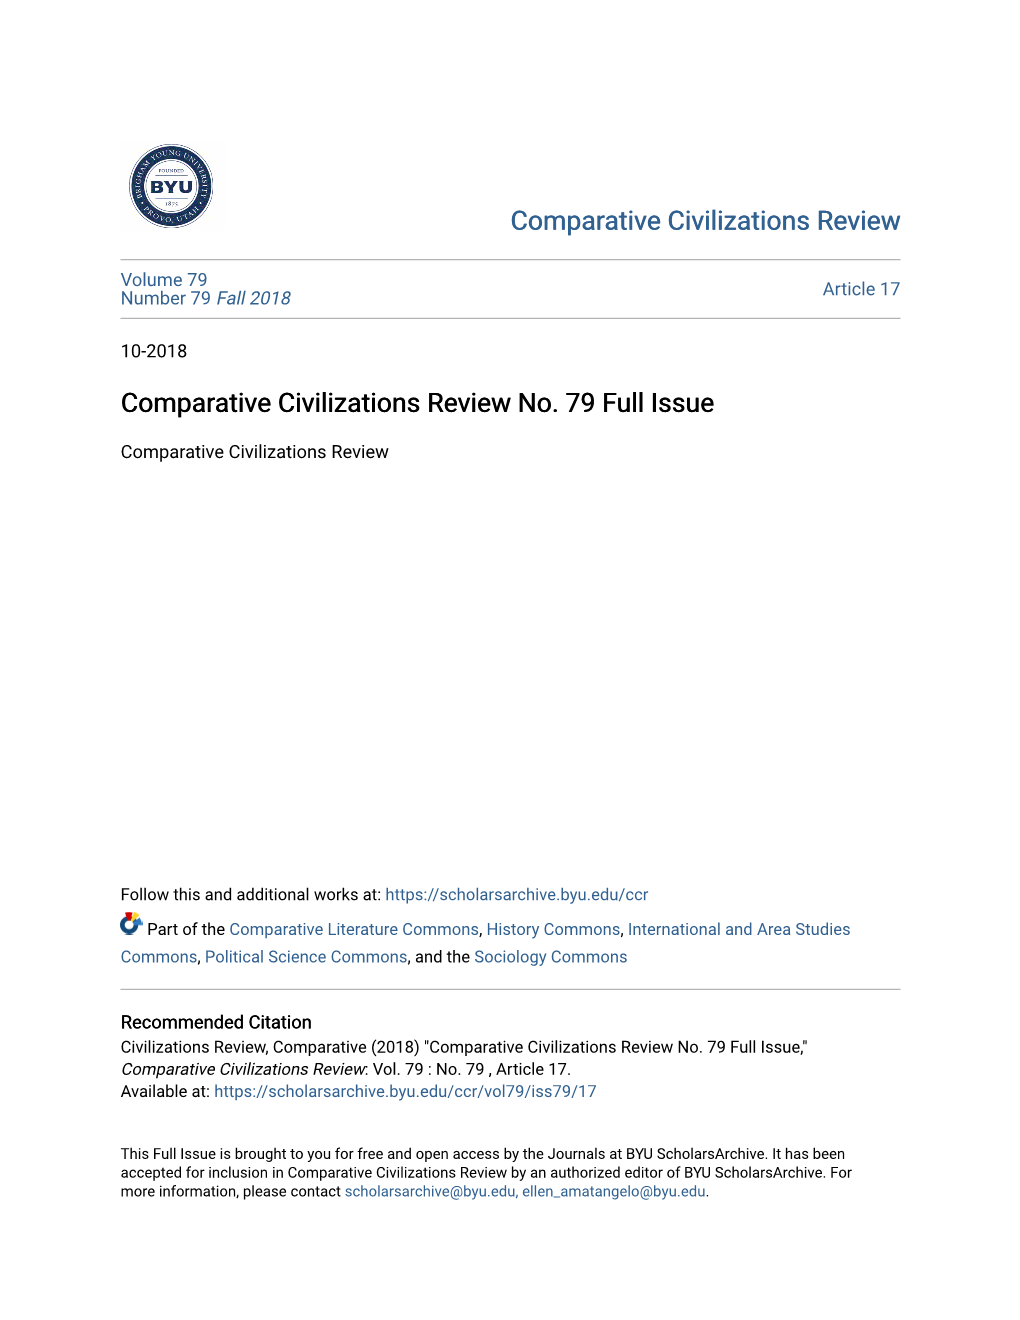 Comparative Civilizations Review No. 79 Full Issue